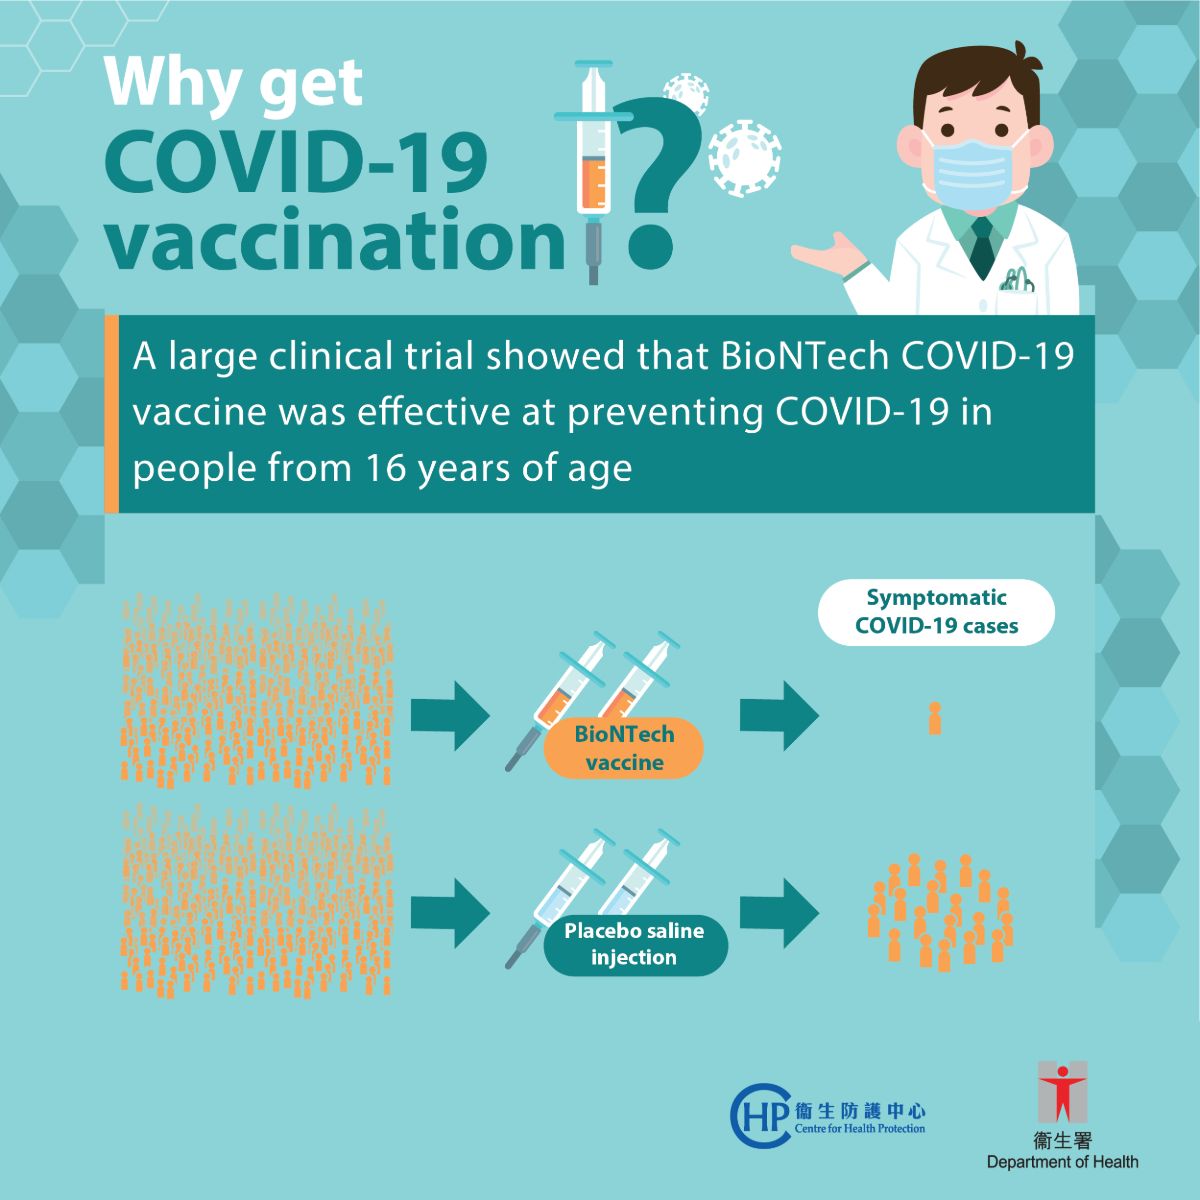 "Why We Should Get COVID-19 Vaccination" Series: Effective at preventing COVID-19